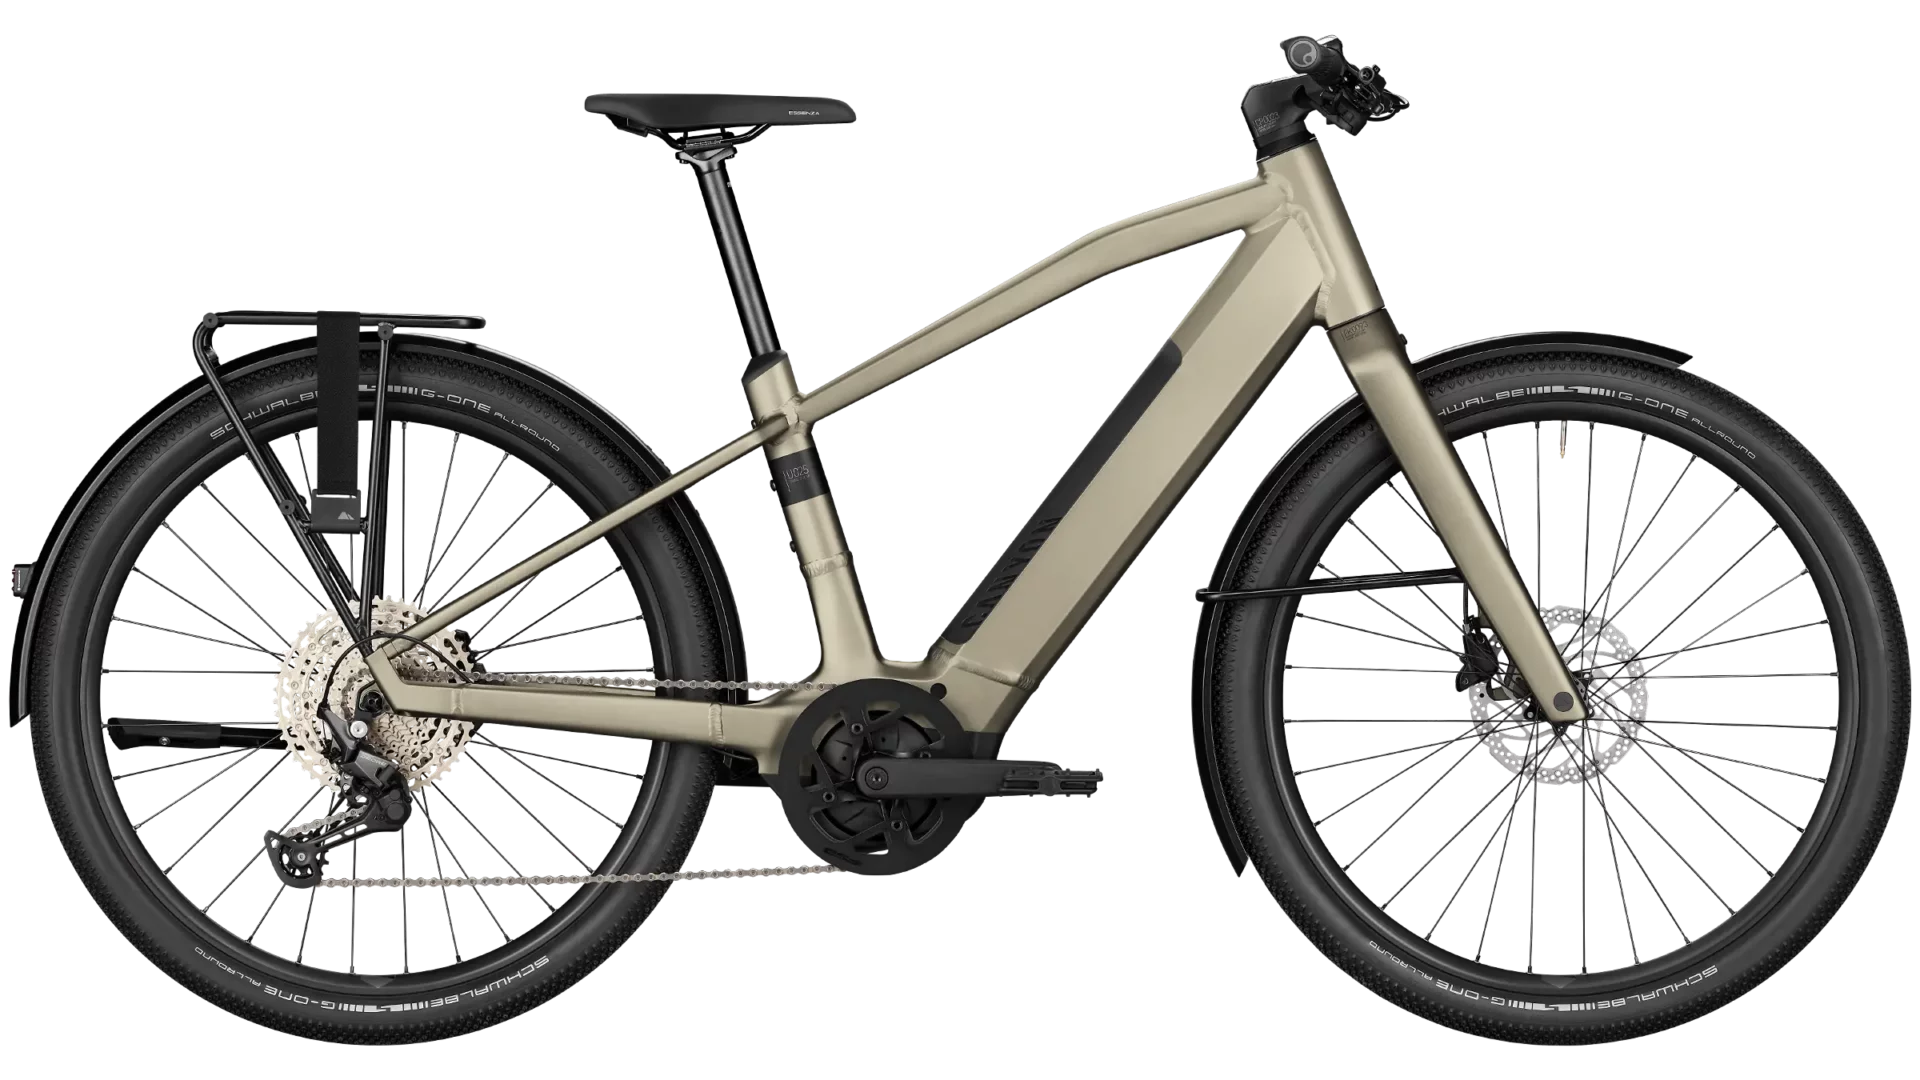 MINI Debuts Two New Limited-Edition E-Bikes For The Urban